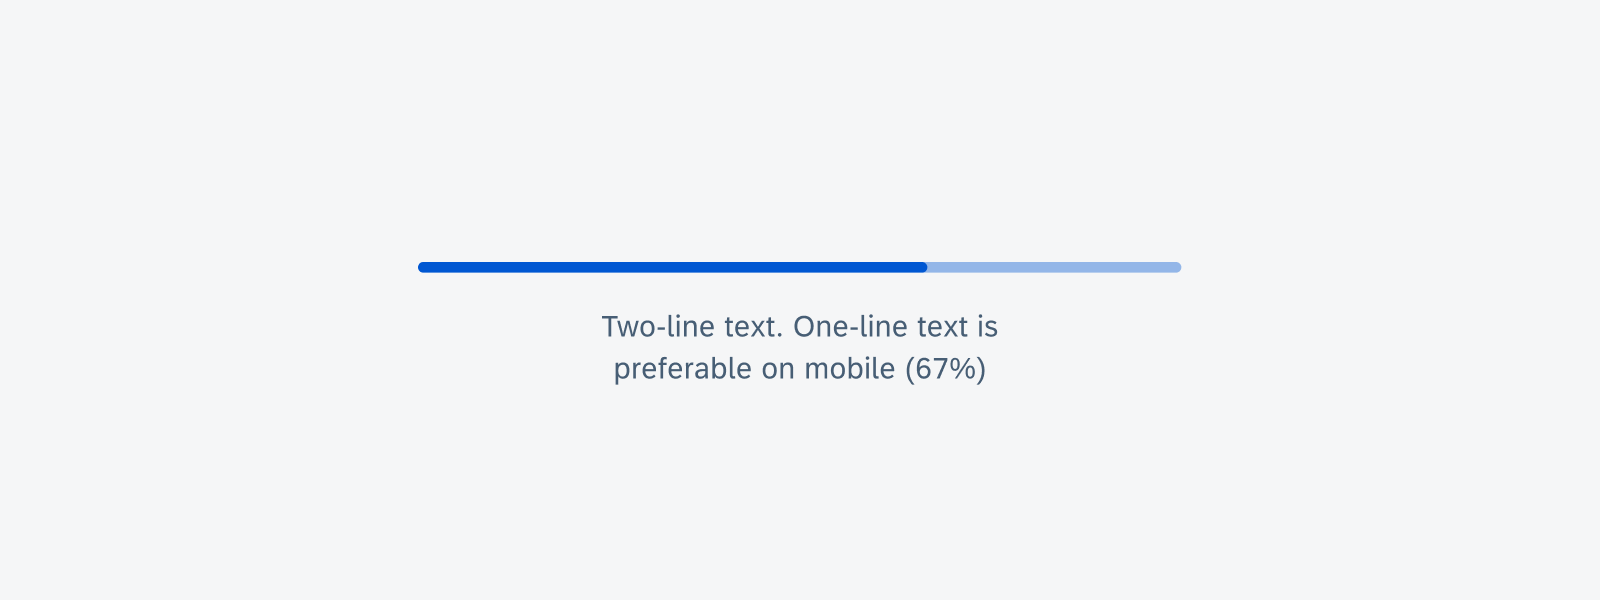 Text wrapping example of a linear progress indicator